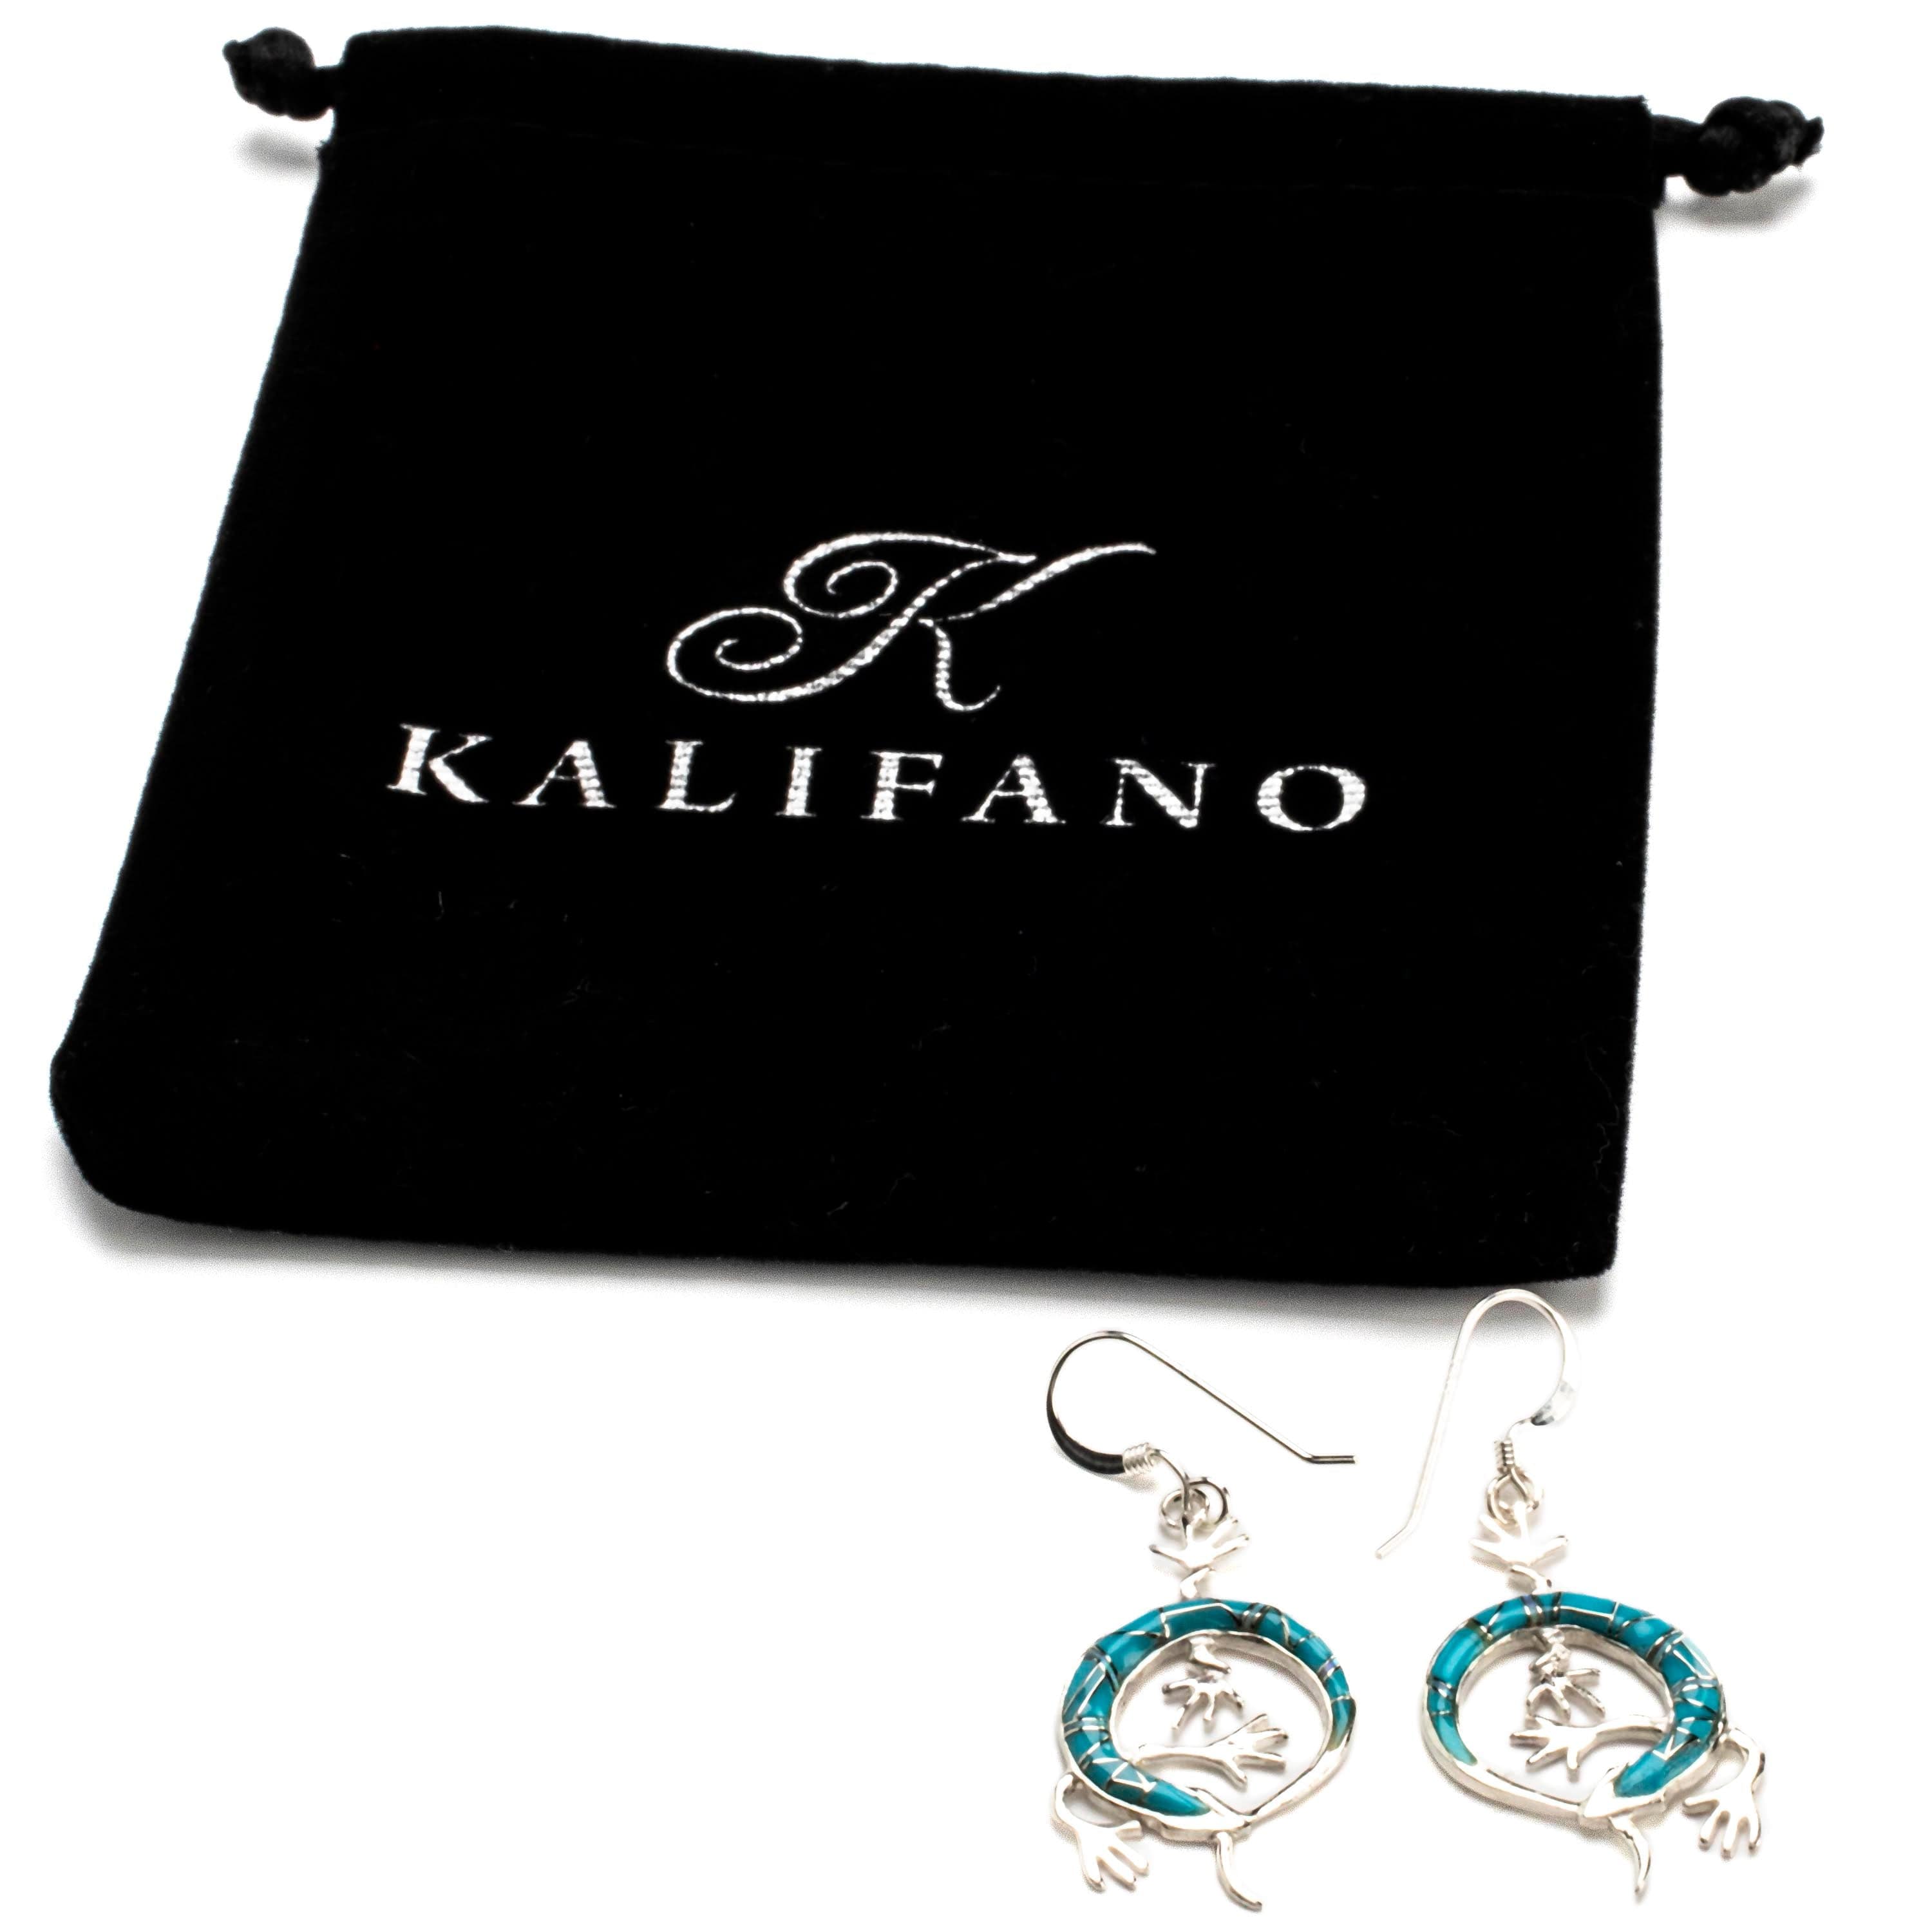 Kalifano Southwest Silver Jewelry Turquoise Lizard Earrings Handmade with Sterling Silver and Opal Accent NME.2162.TQ